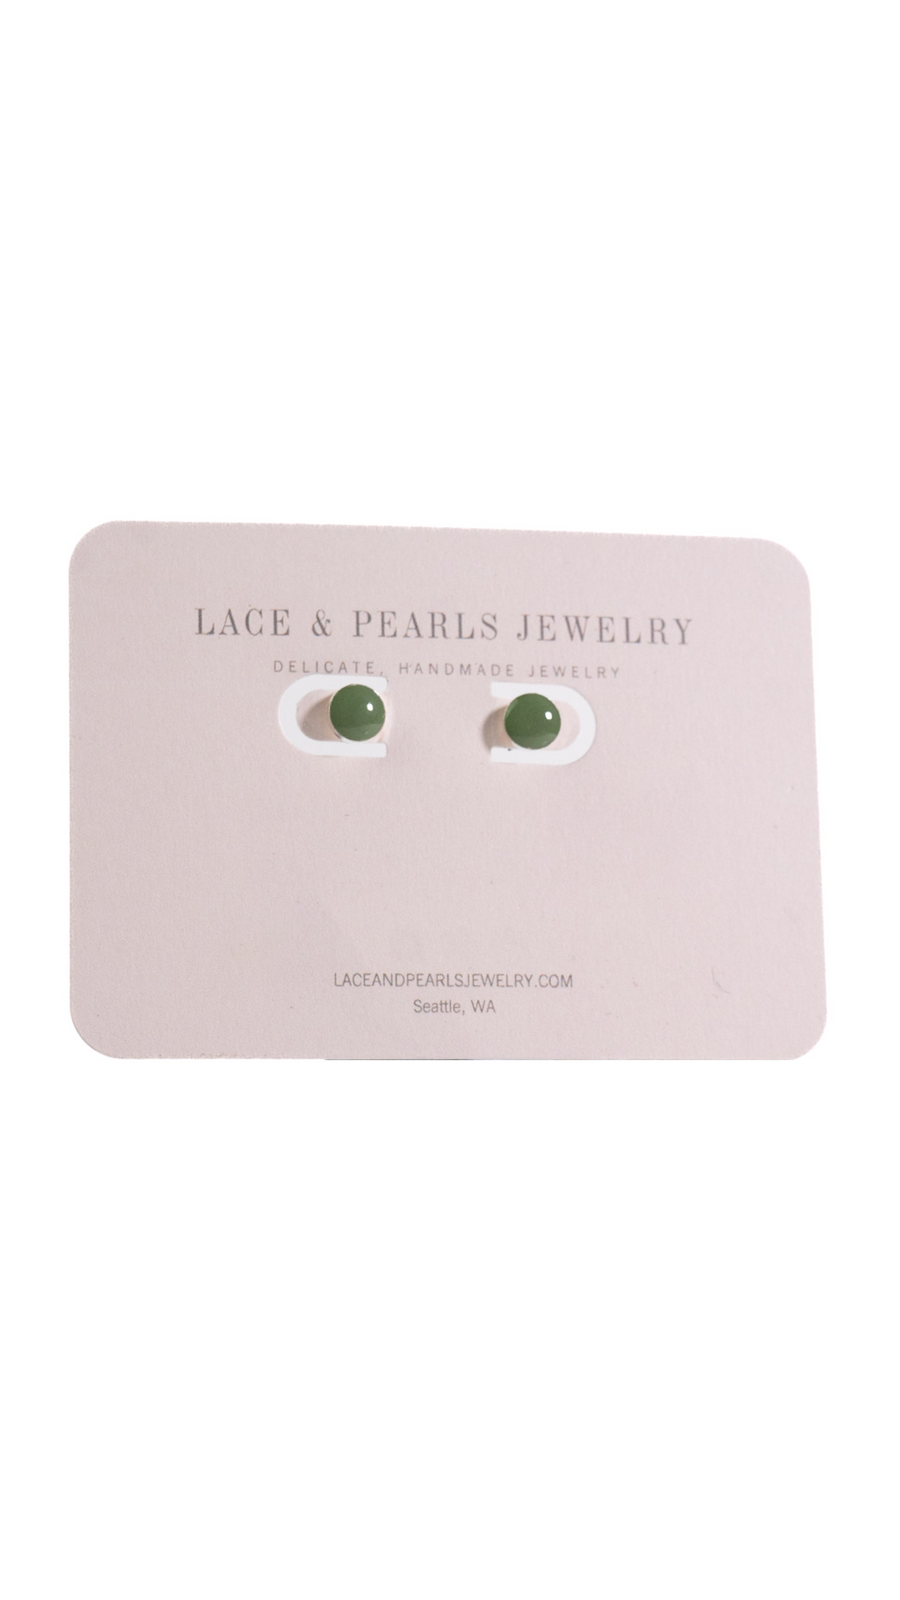 Green Resin Circle Stud Earring by Lace & Pearls Jewelry